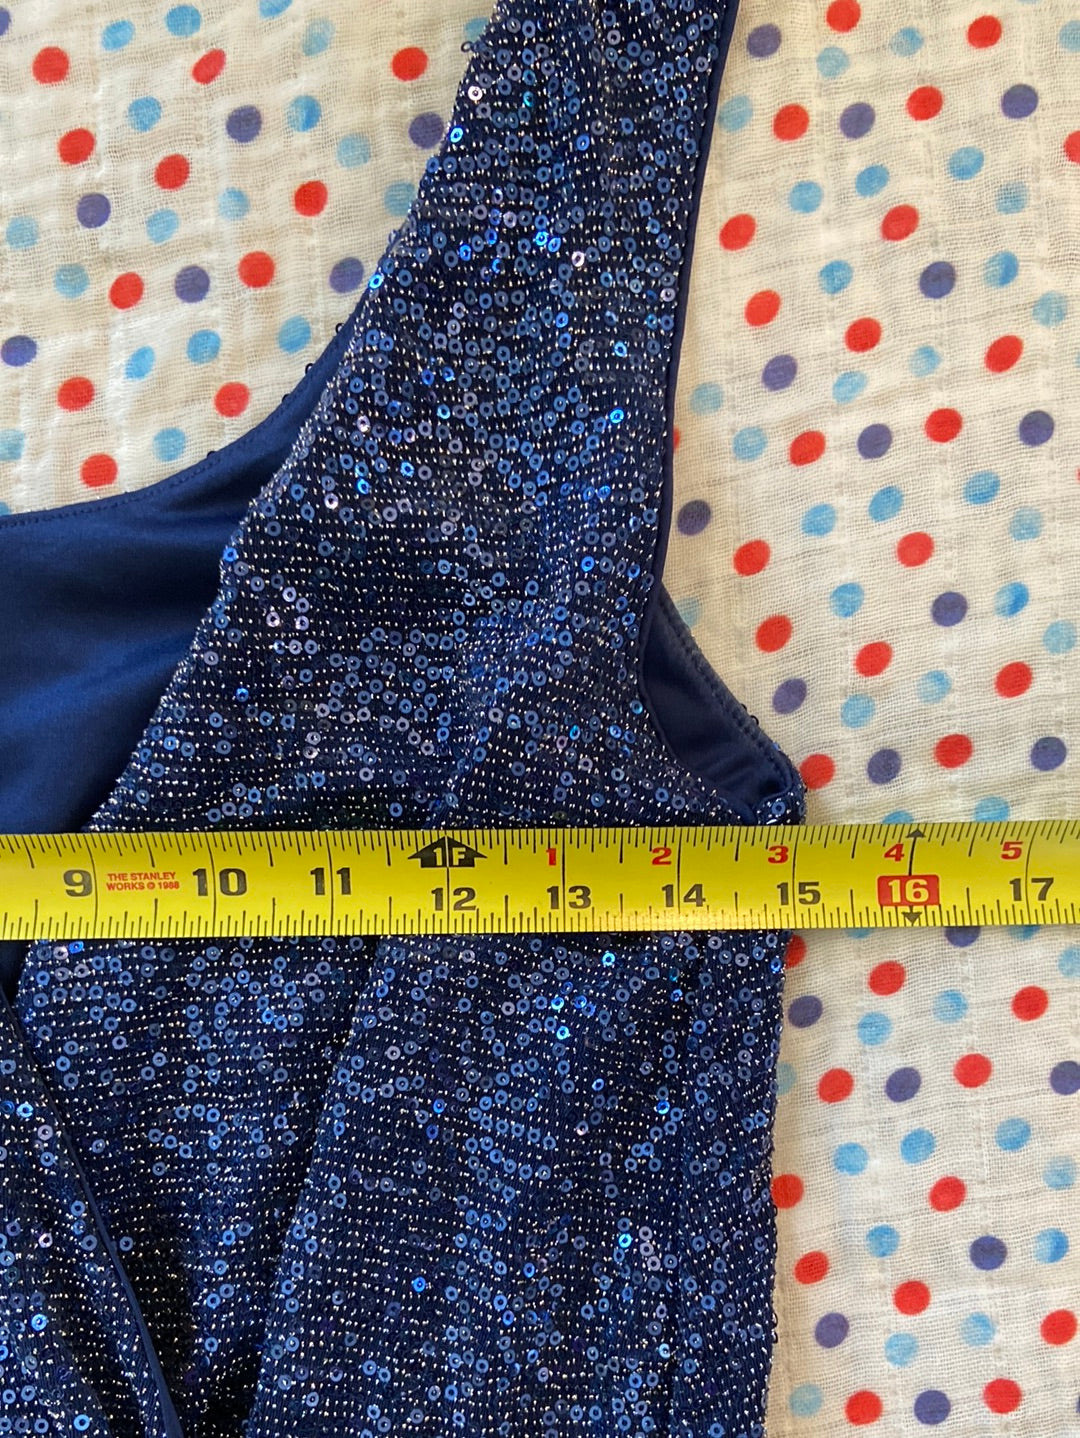 BLUE BEAUTY Express Blue Sequined Dress Size S